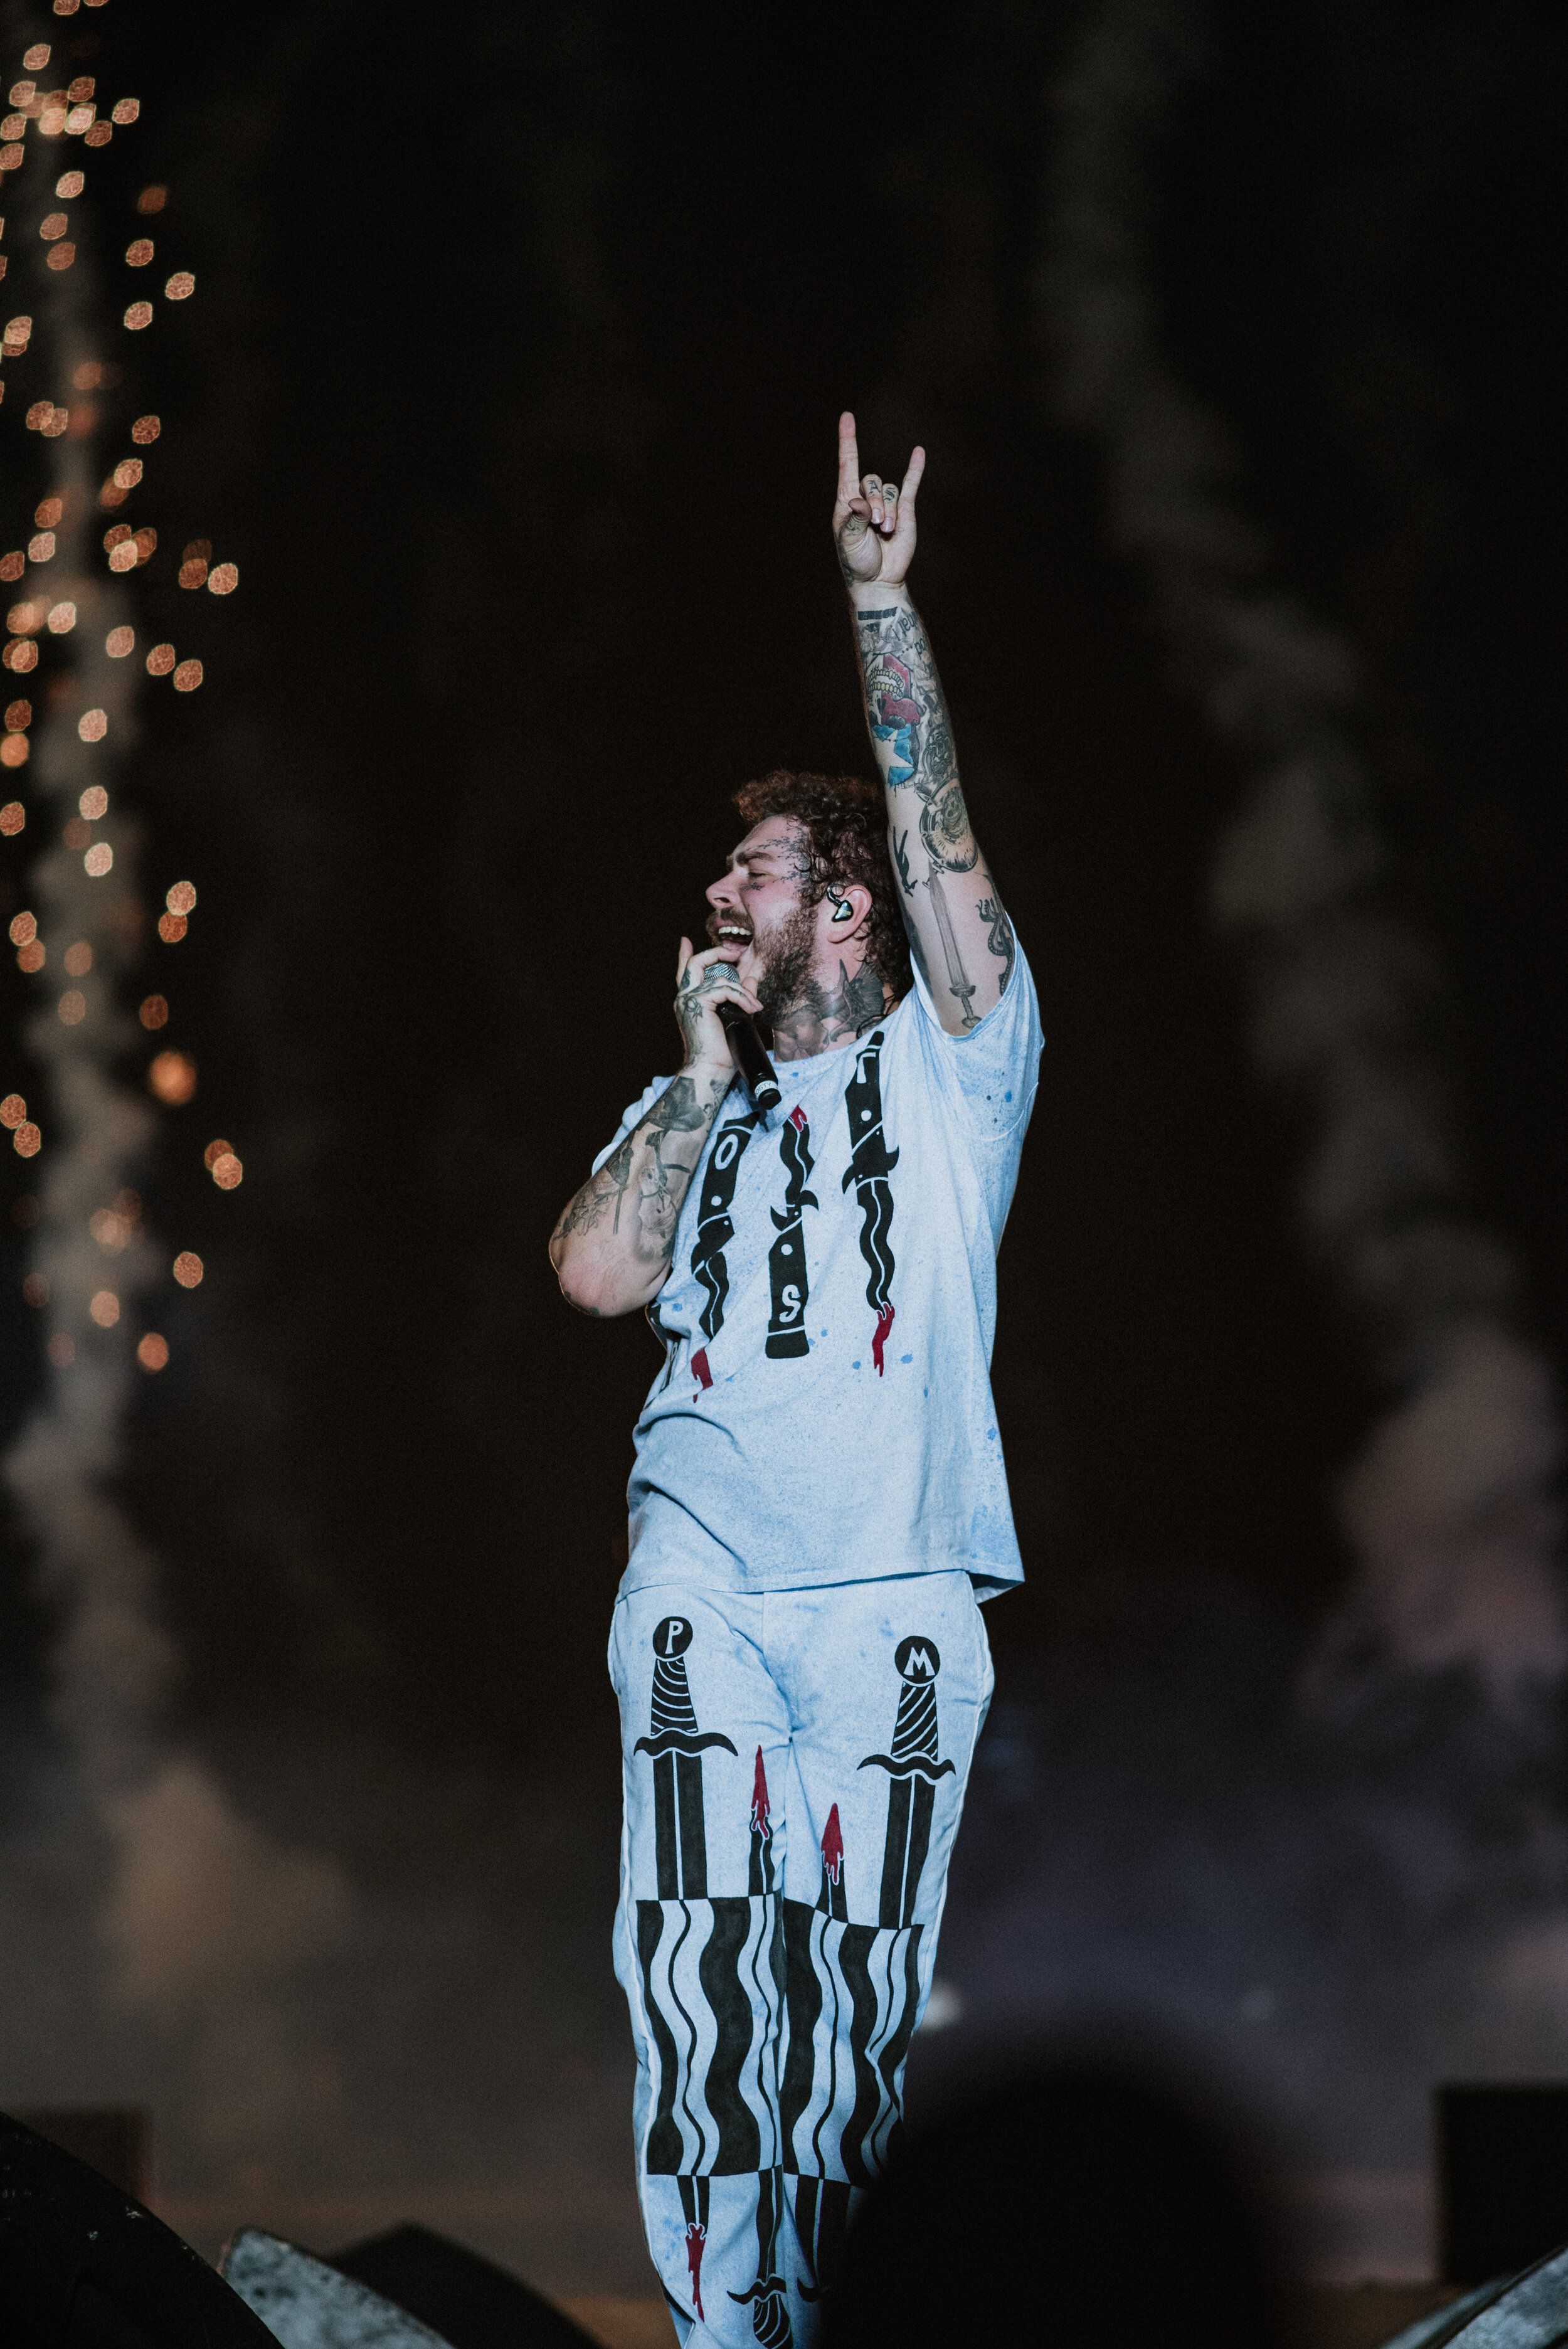 Post Malone in Budapest